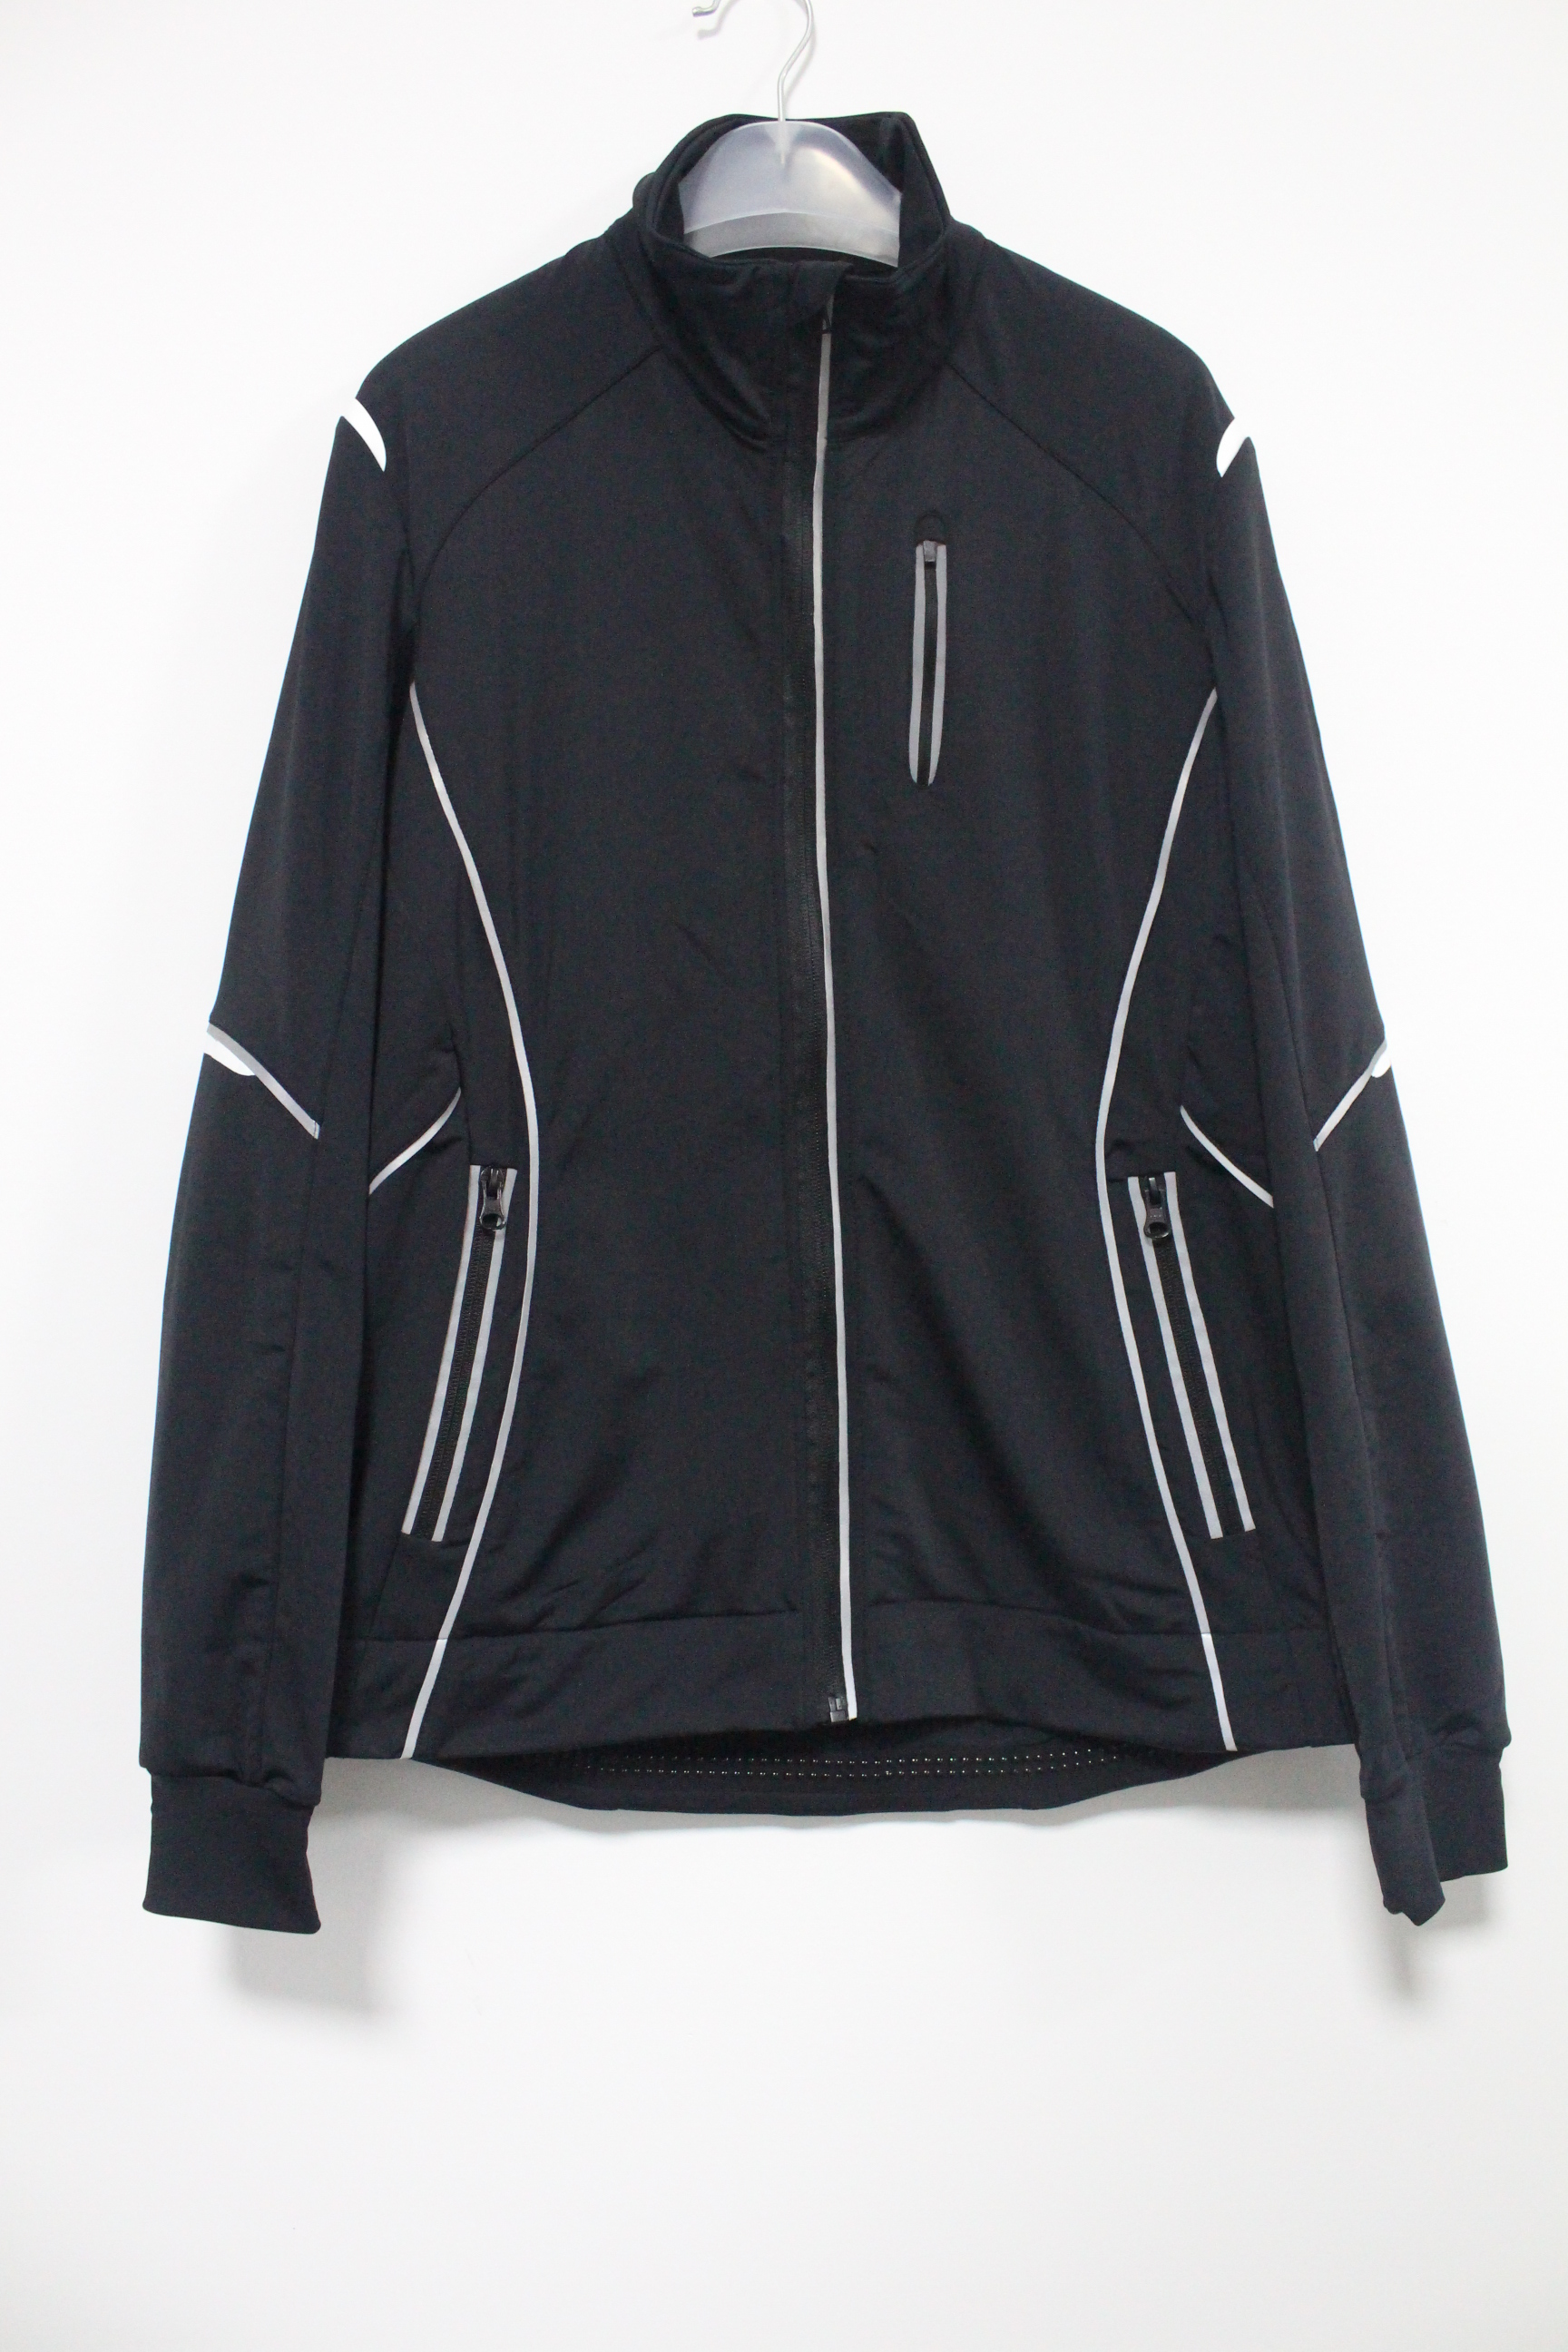 Women's Outdoor Black Cycling Highlight Jackets %%sep%